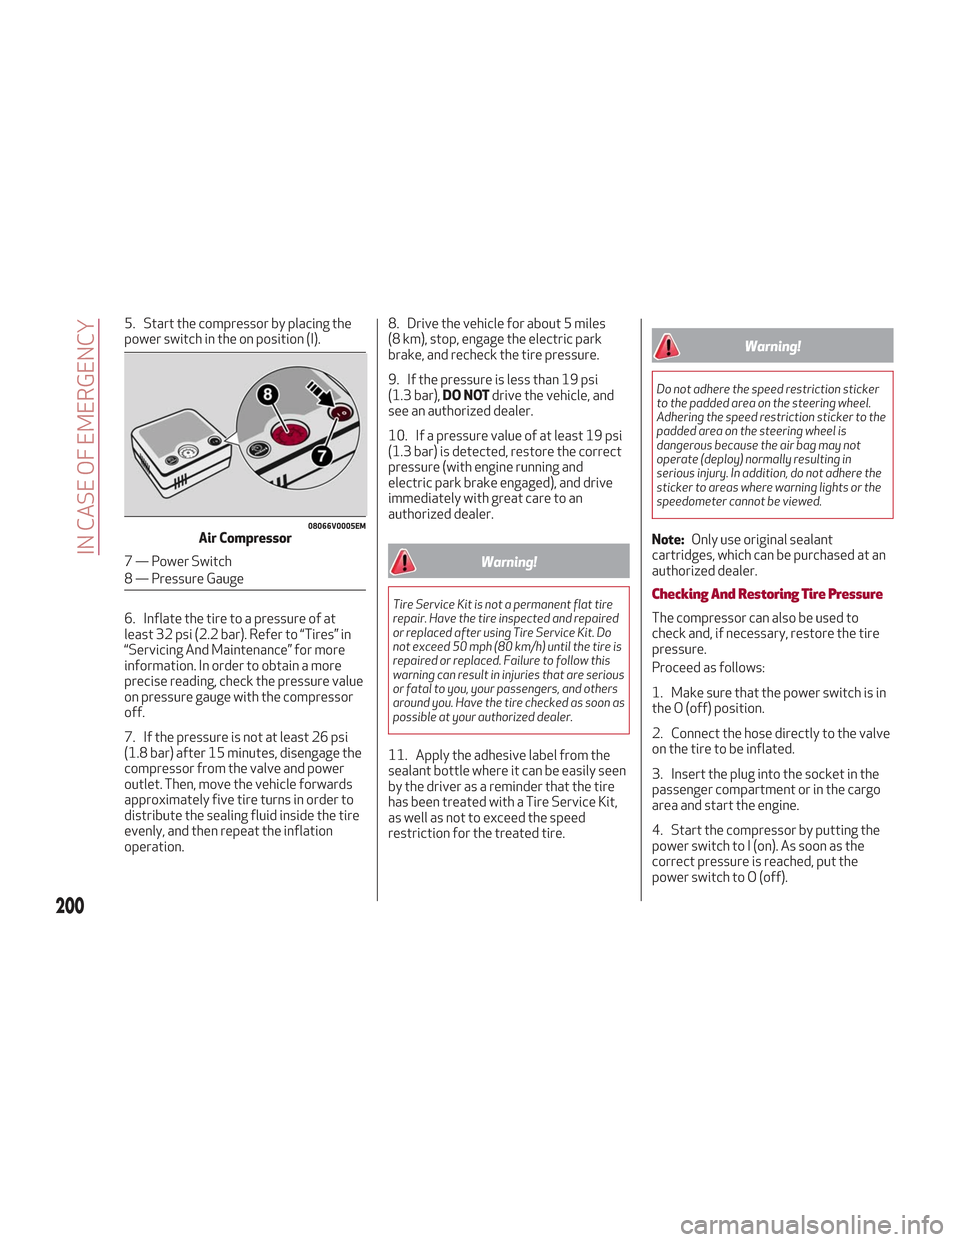 Alfa Romeo Stelvio 2018  Owners Manual 5. Start the compressor by placing the
power switch in the on position (I).
6. Inflate the tire to a pressure of at
least 32 psi (2.2 bar). Refer to “Tires” in
“Servicing And Maintenance” for 